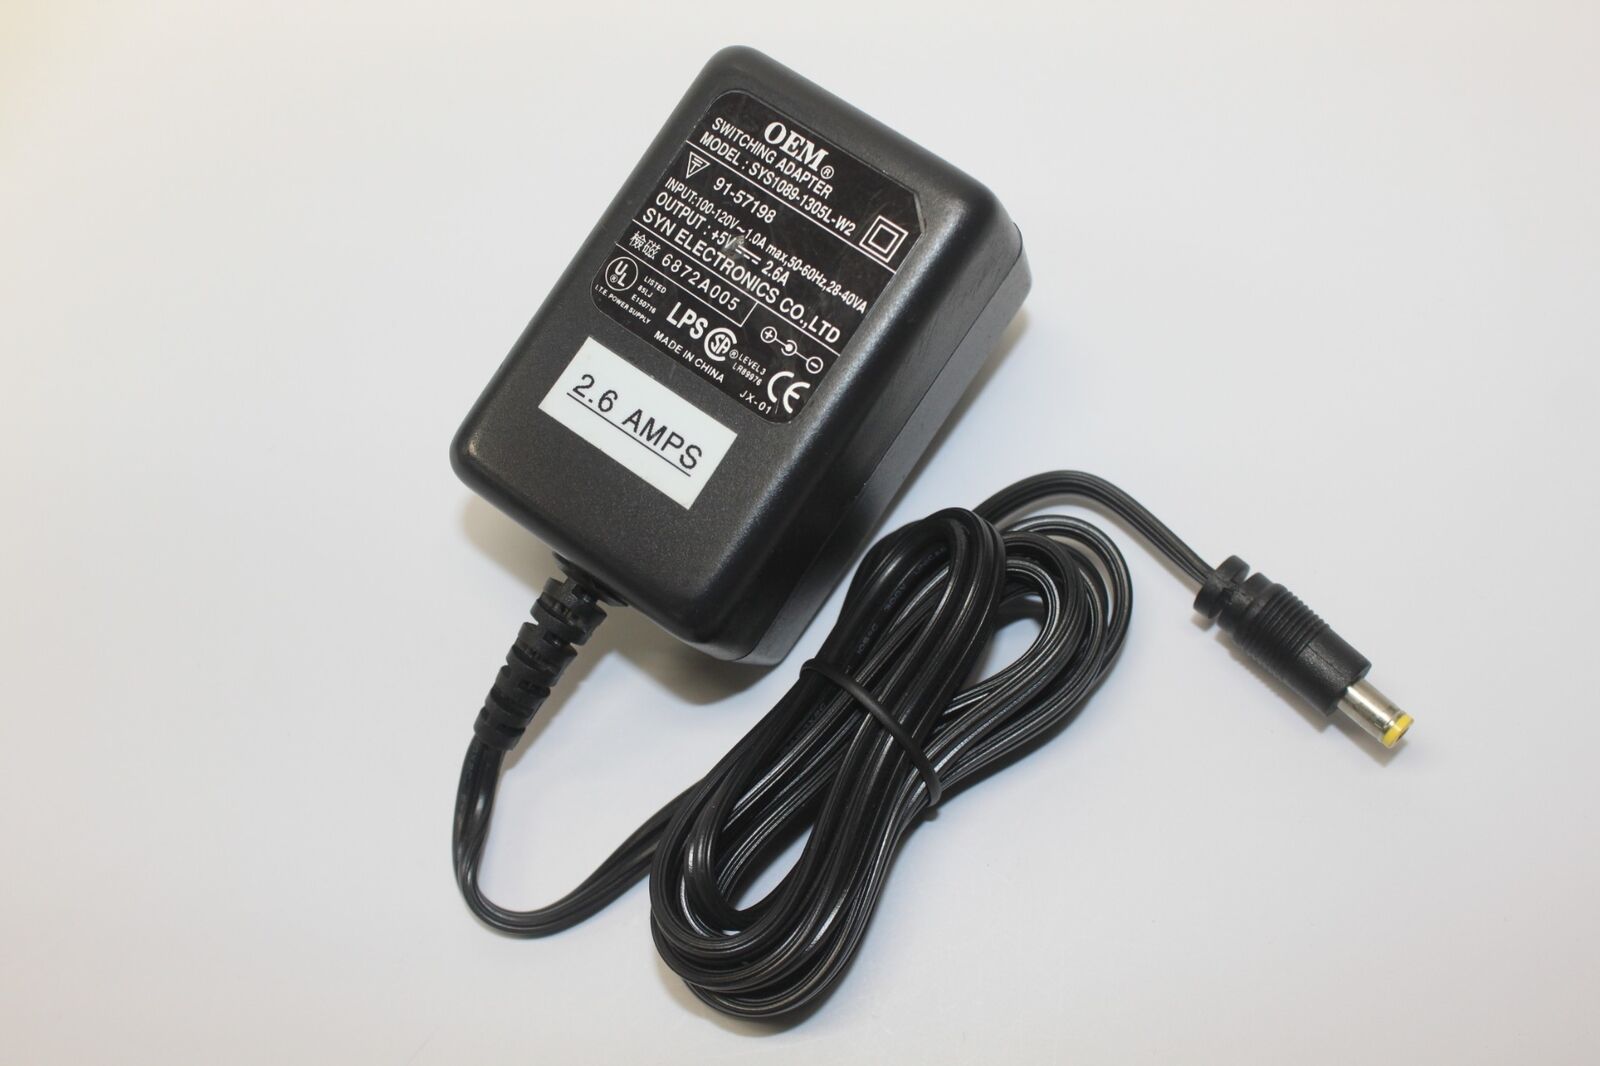 SYN OEM SYS1089-1305L-W2 Switching AC Adapter Power Supply Cord Charger DC 5V Brand: SYN Type: Adapter MPN: Does - Click Image to Close